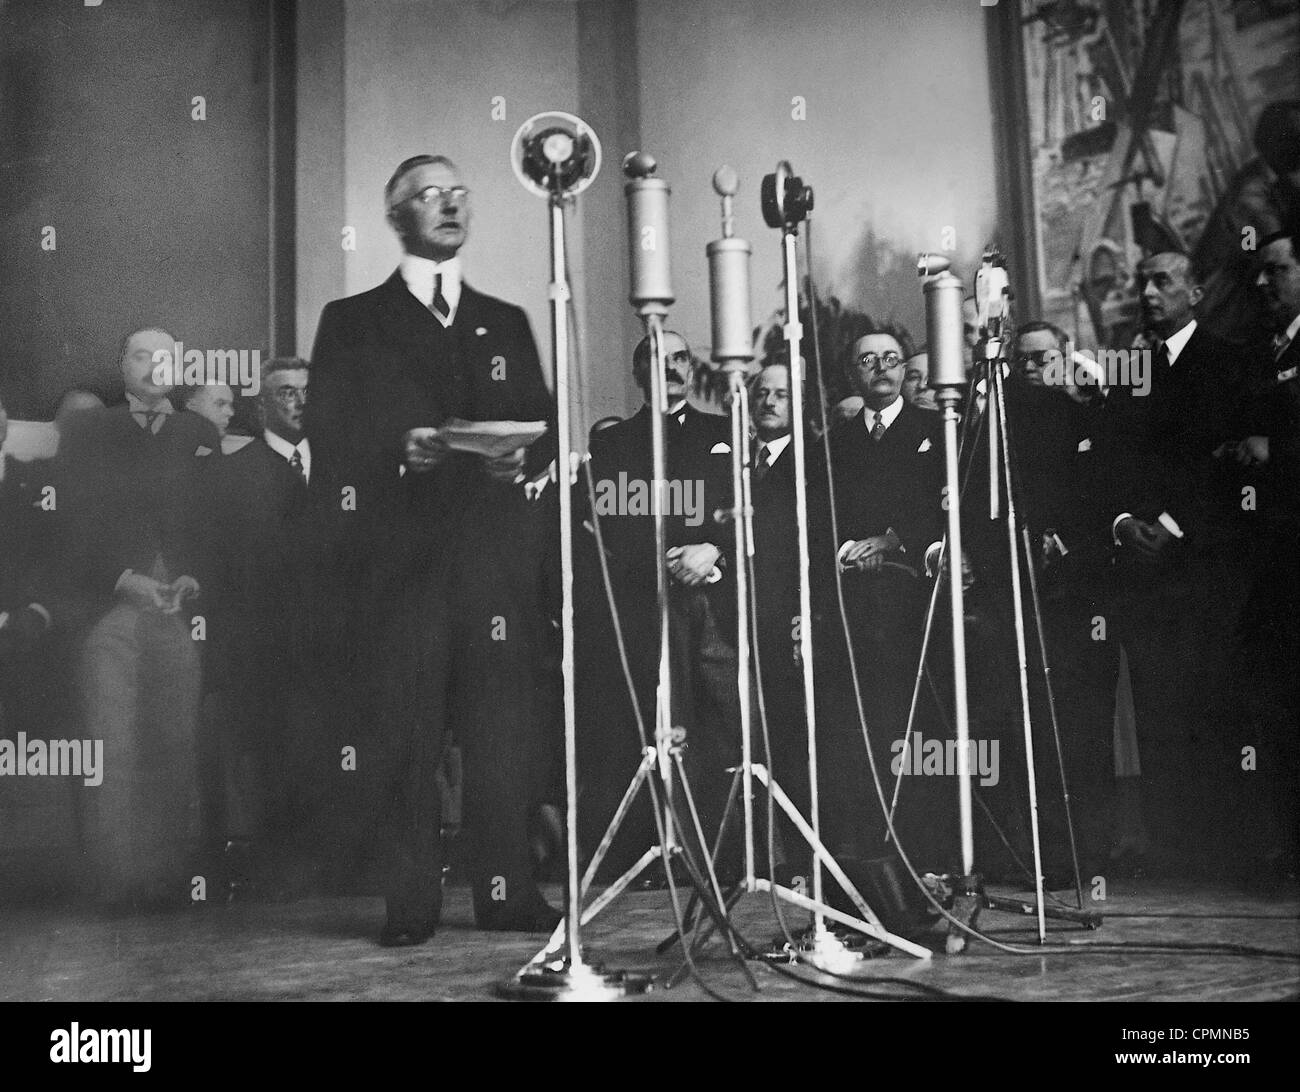 Hjalmar Schacht at the opening of the German Pavilion, 1937 Stock Photo